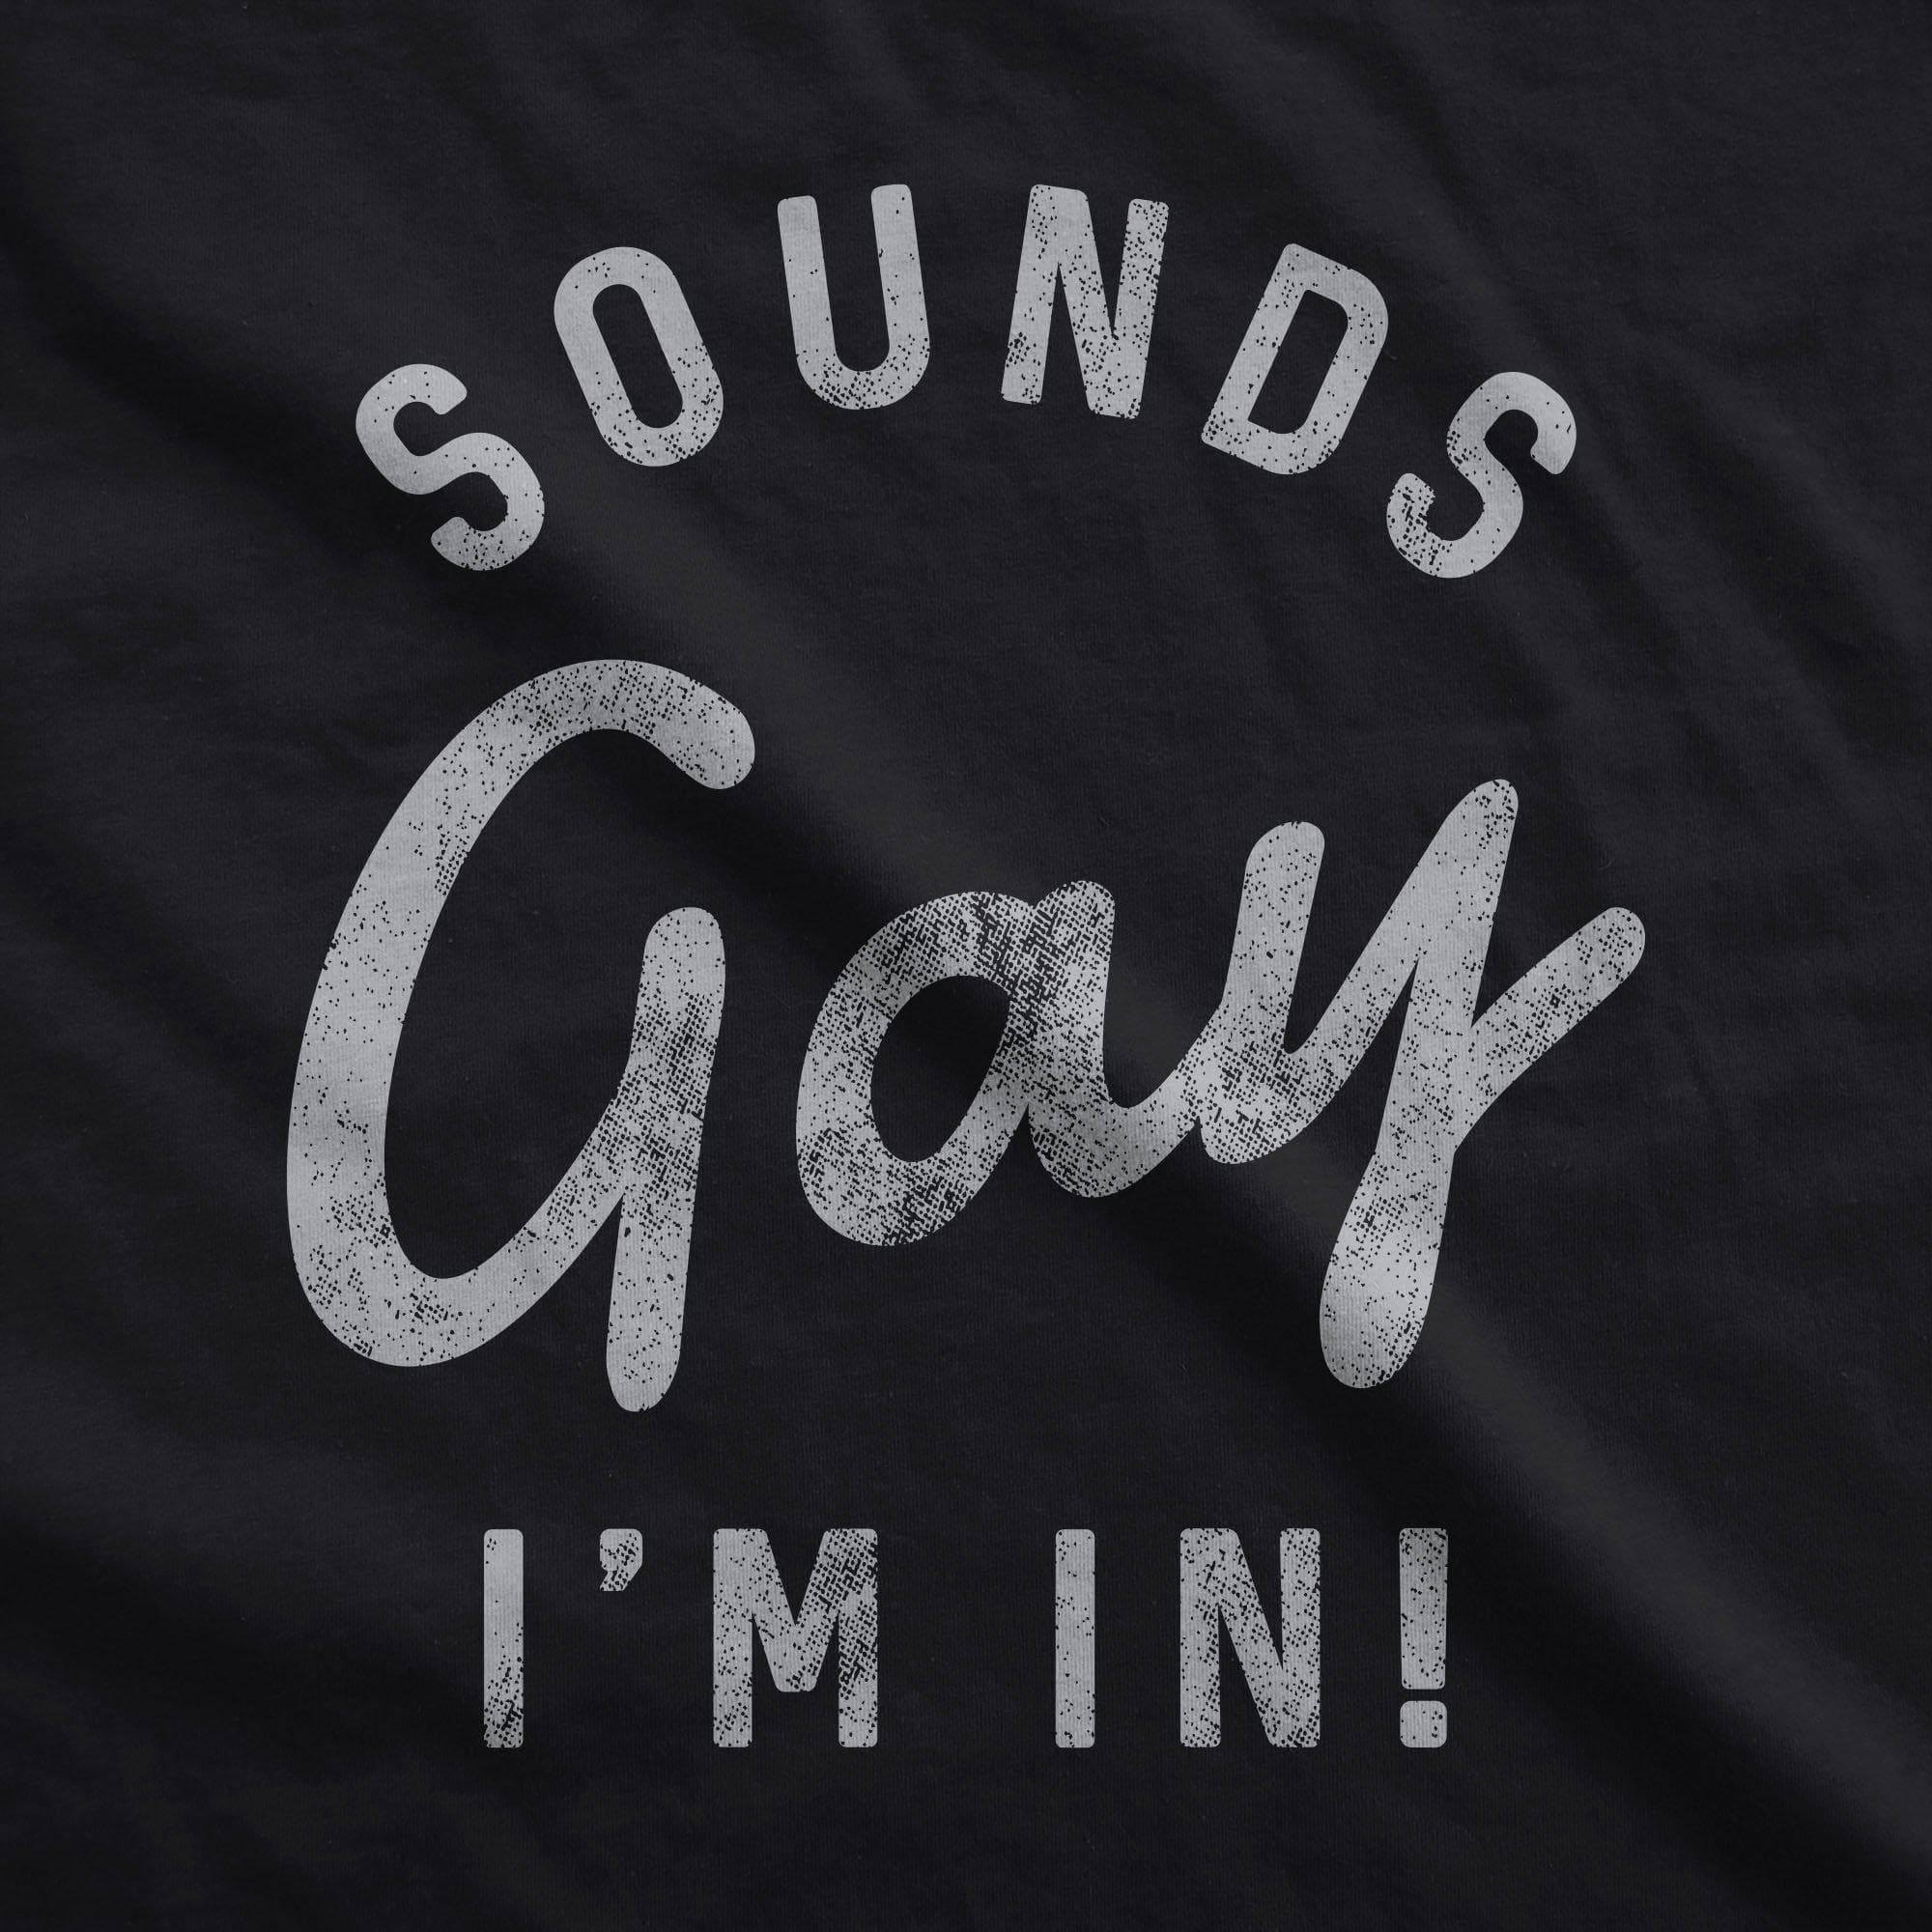 Sounds Gay I'm In Face Mask Mask - Crazy Dog T-Shirts